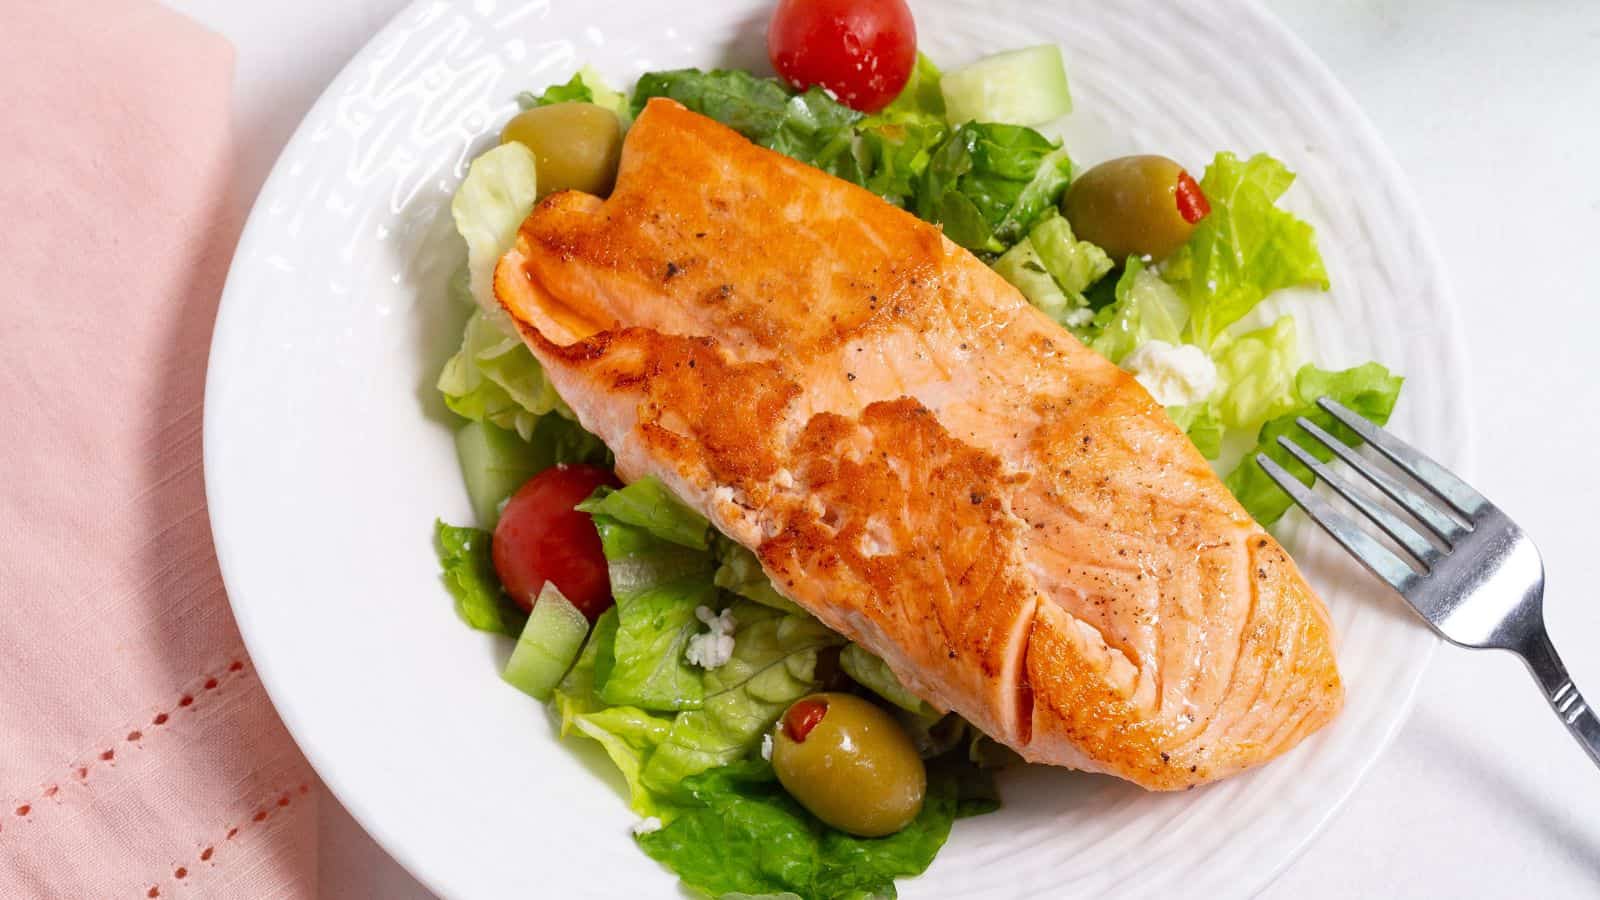 A grilled salmon fillet served on a bed of fresh salad with lettuce, tomatoes, and olives on a white plate.